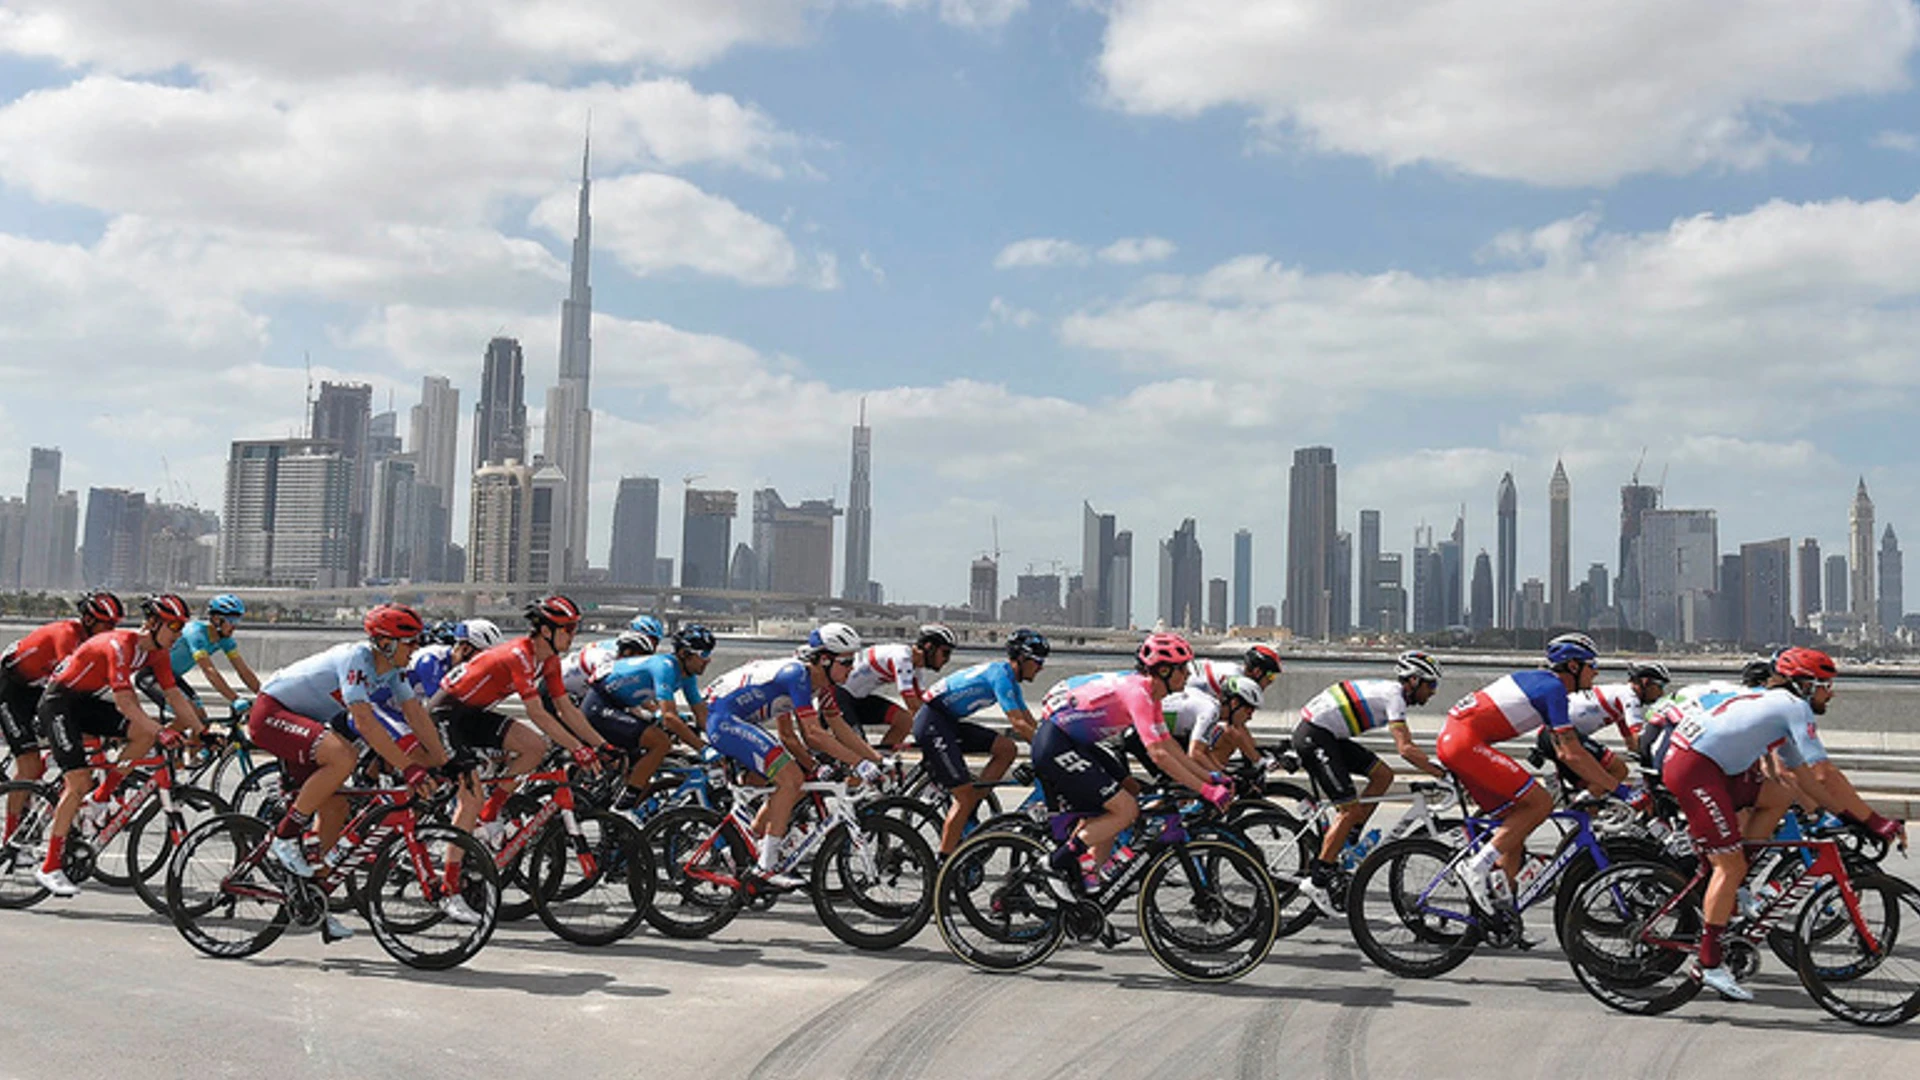 From Abu Dhabi, Cyclists pedal to Expo 2020 Dubai in Celebration of UAE’s Golden Jubilee